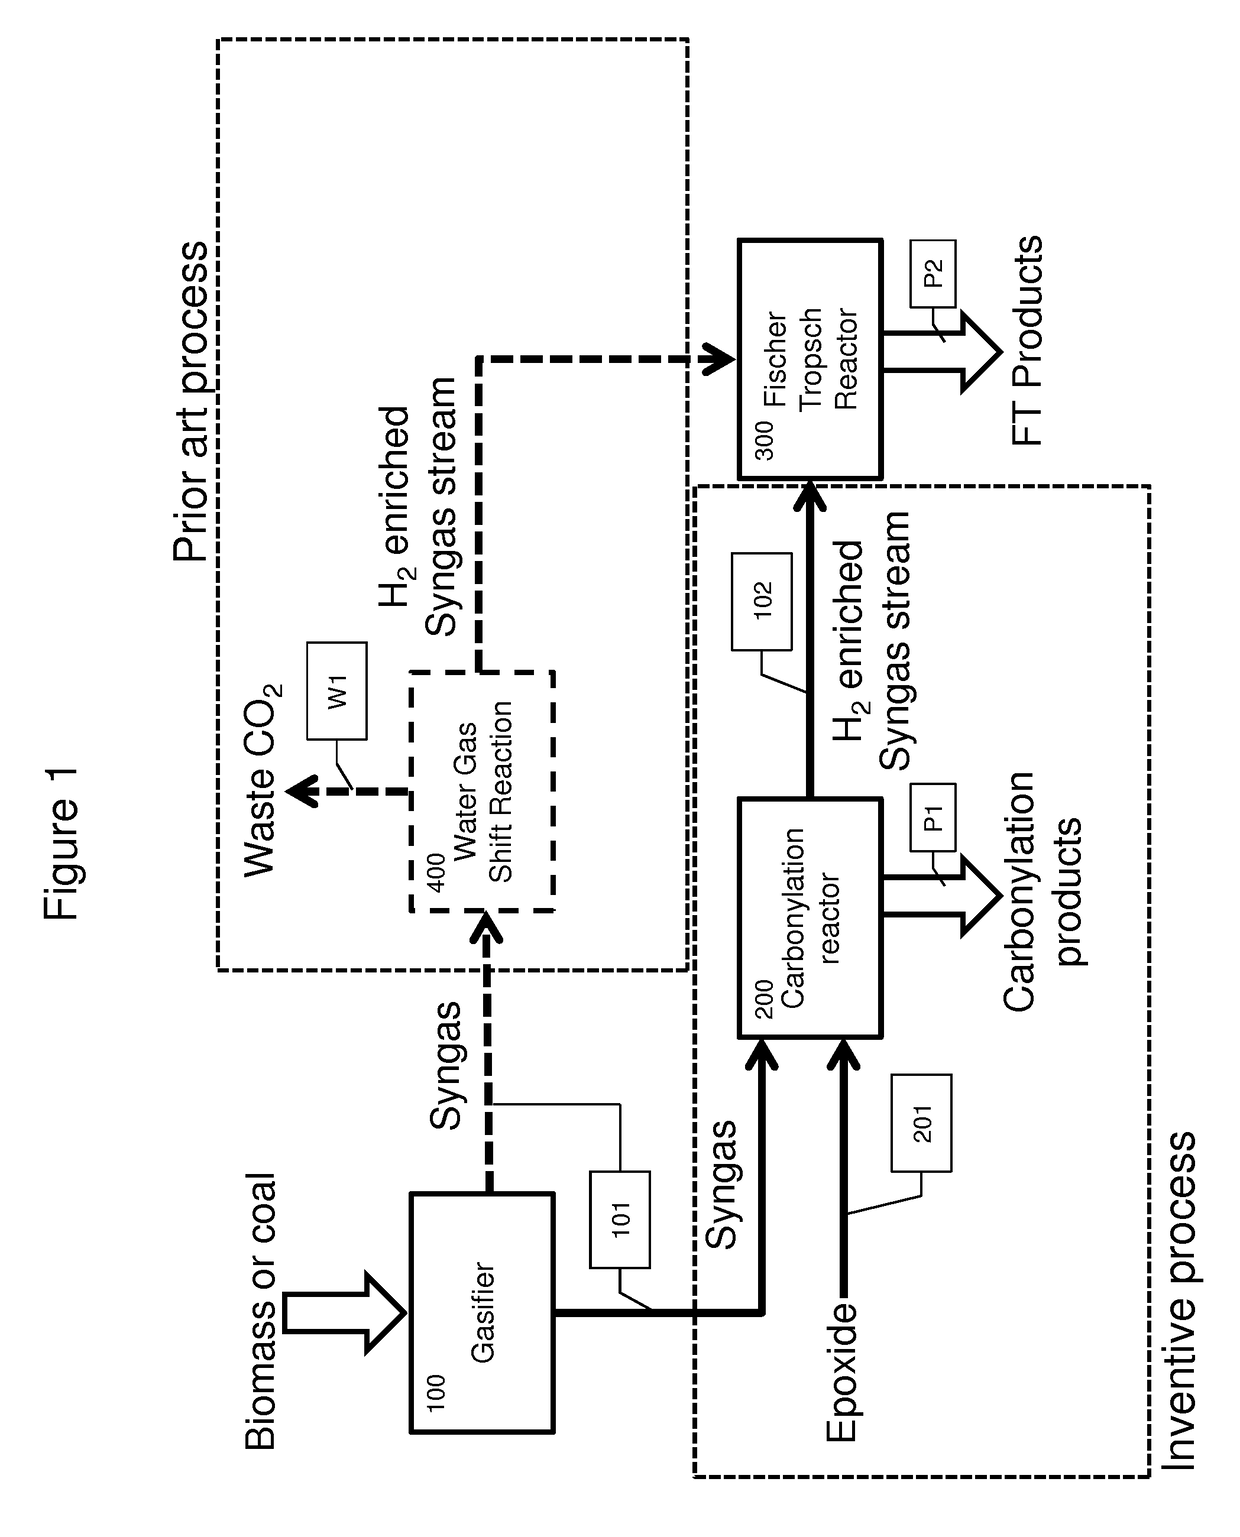 Integrated methods for chemical synthesis